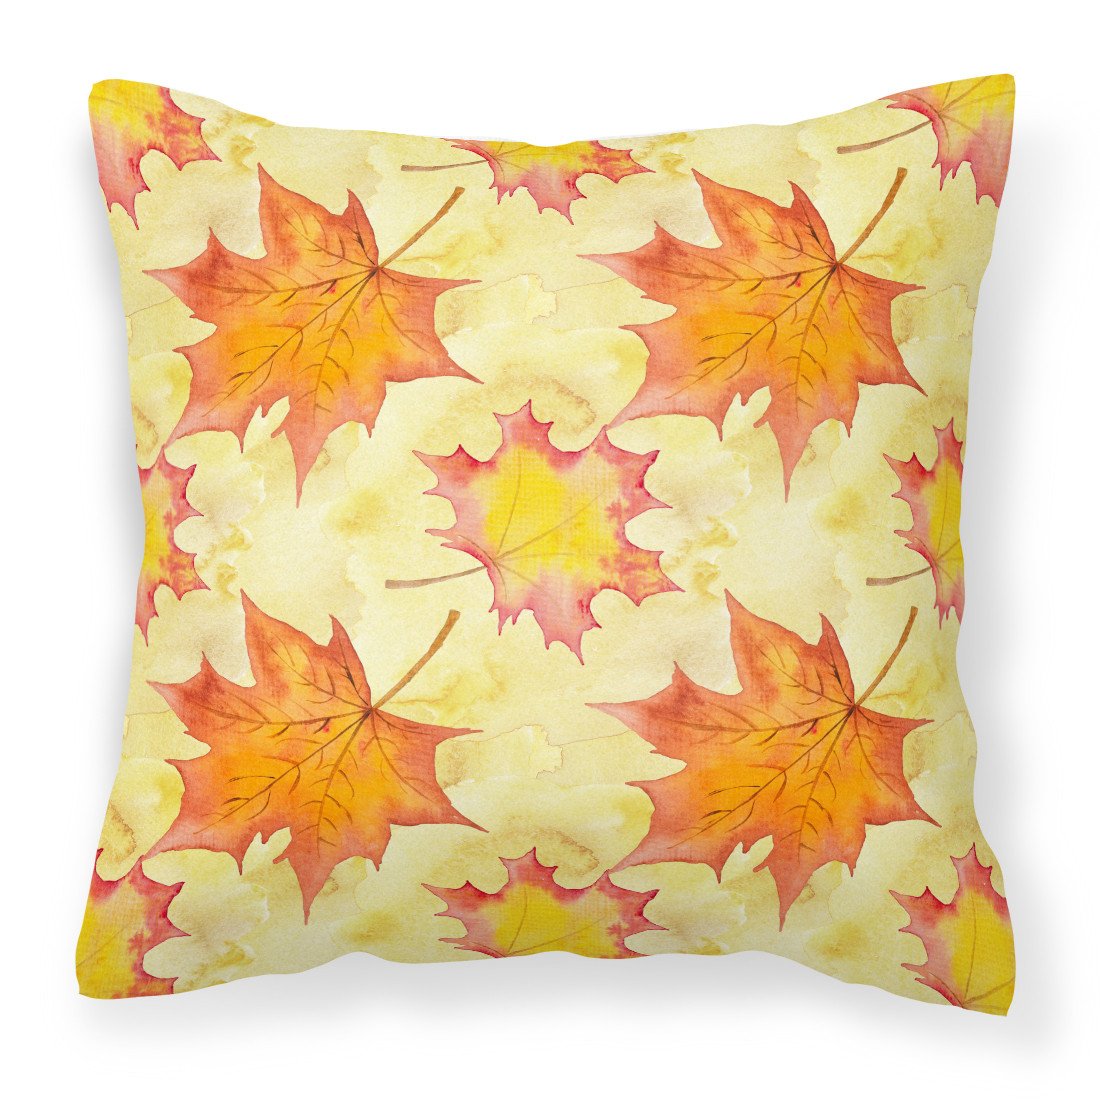 Fall Leaves Scattered Fabric Decorative Pillow BB7496PW1818 by Caroline's Treasures